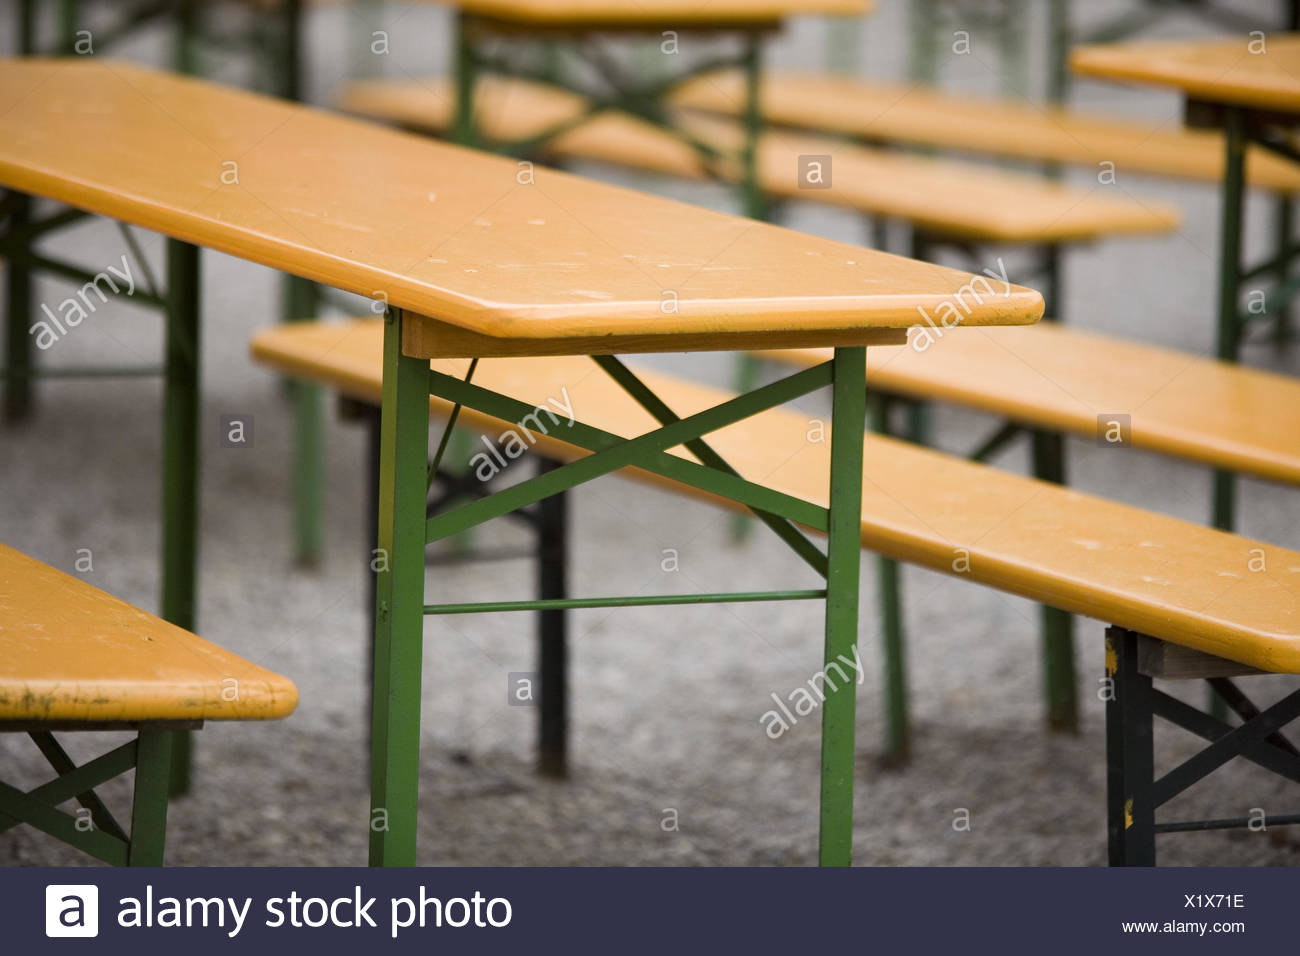 Beer Garden Tables Benches Empty Stock Photo 276556826 Alamy